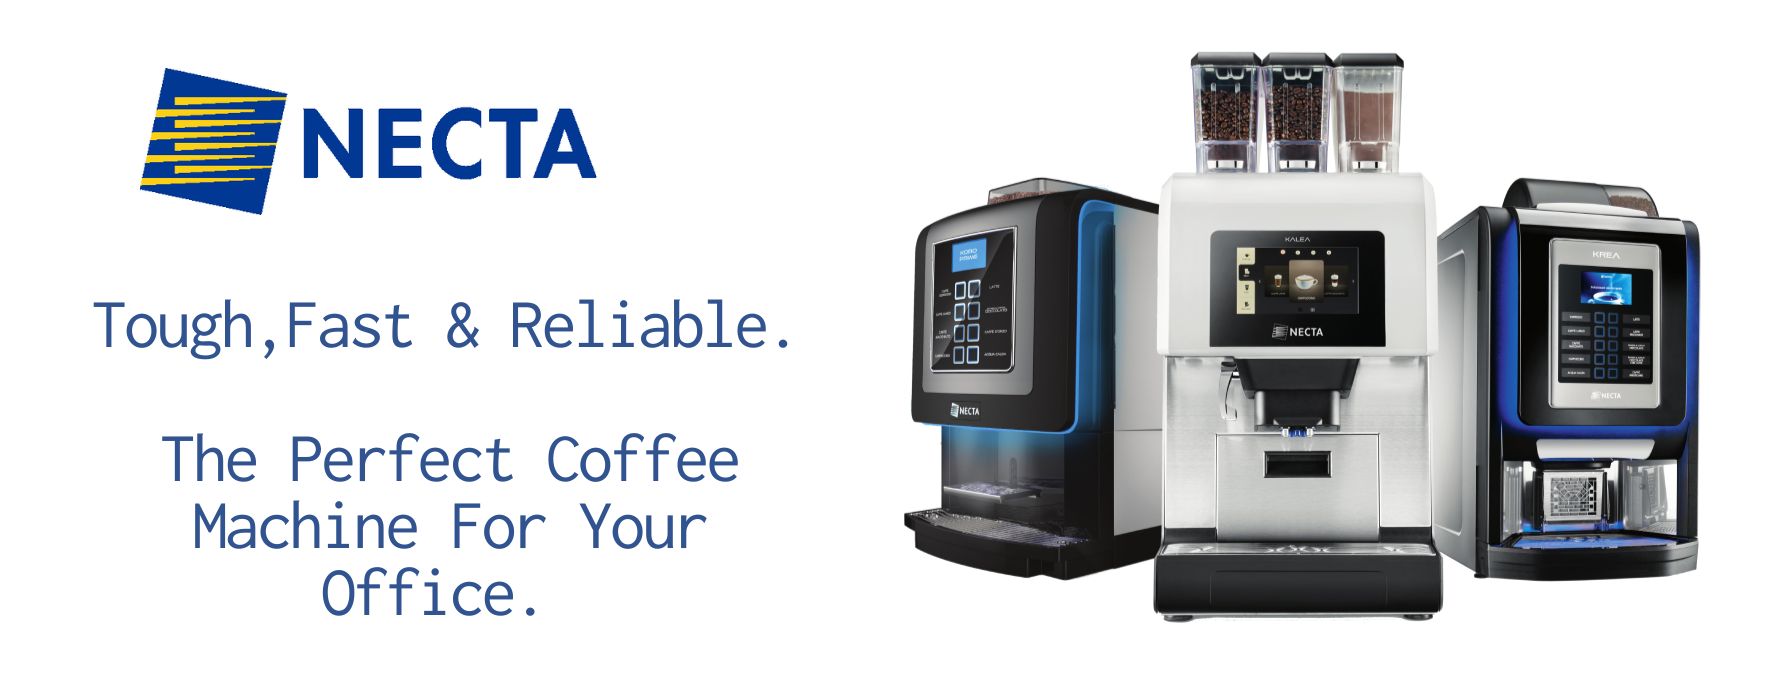 Necta Coffee Machines are perfect for the large office that needs lots of coffee